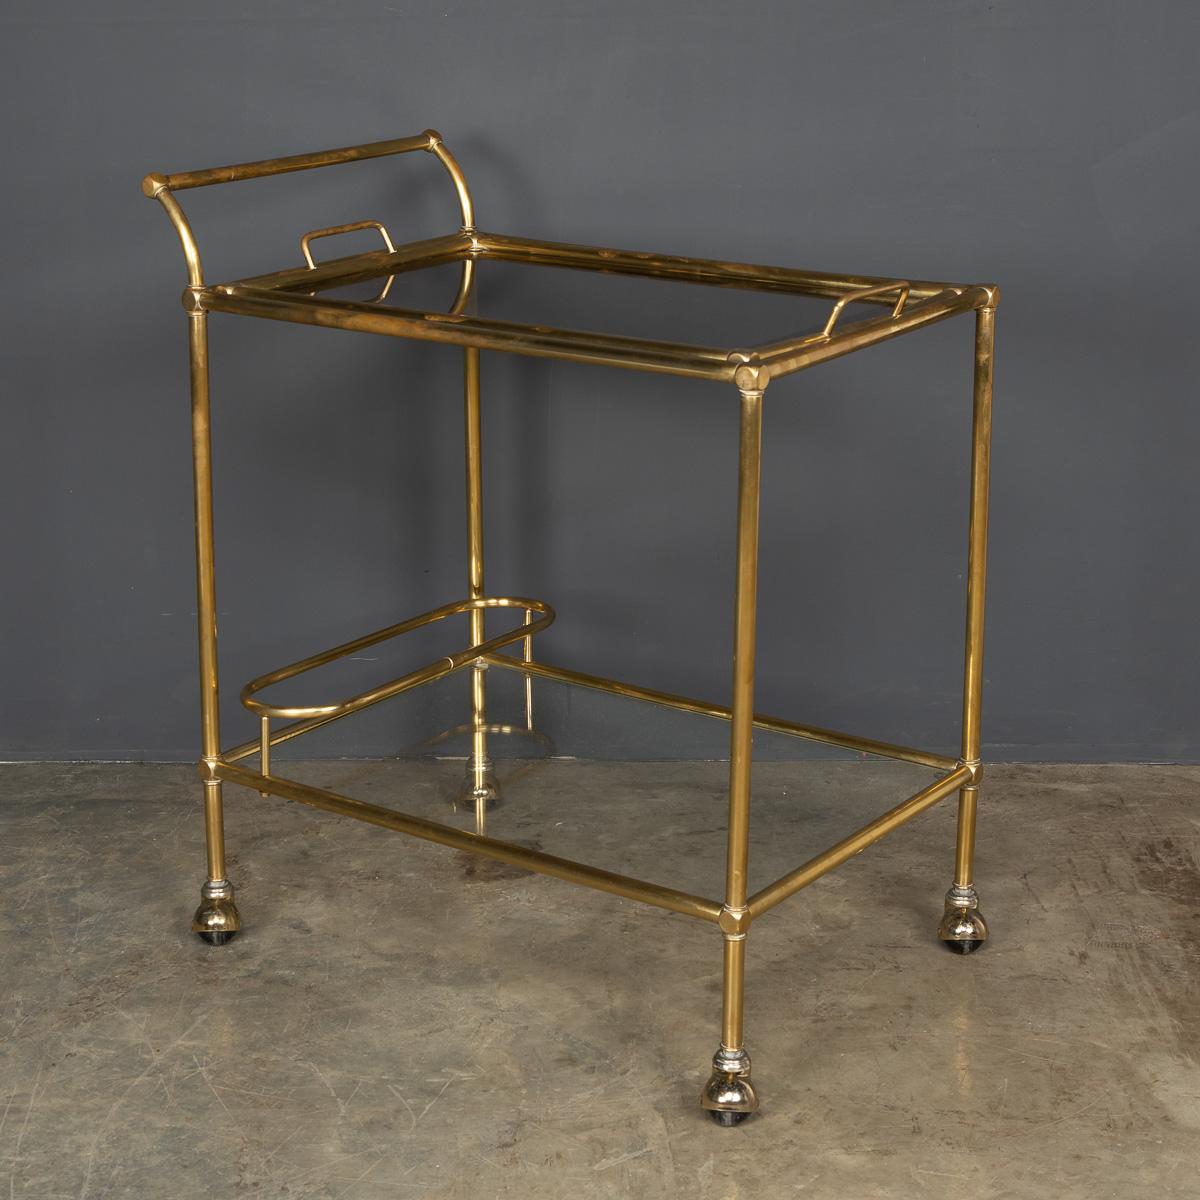 Stylish 20th Century two-tier brass drinks trolley with lift off serving tray and bottle holder. A must have for any sophisticated cocktail party.

Condition
In Great Condition - No Damage.

Size
Width: 66cm
Depth: 44cm
Height: 79cm.